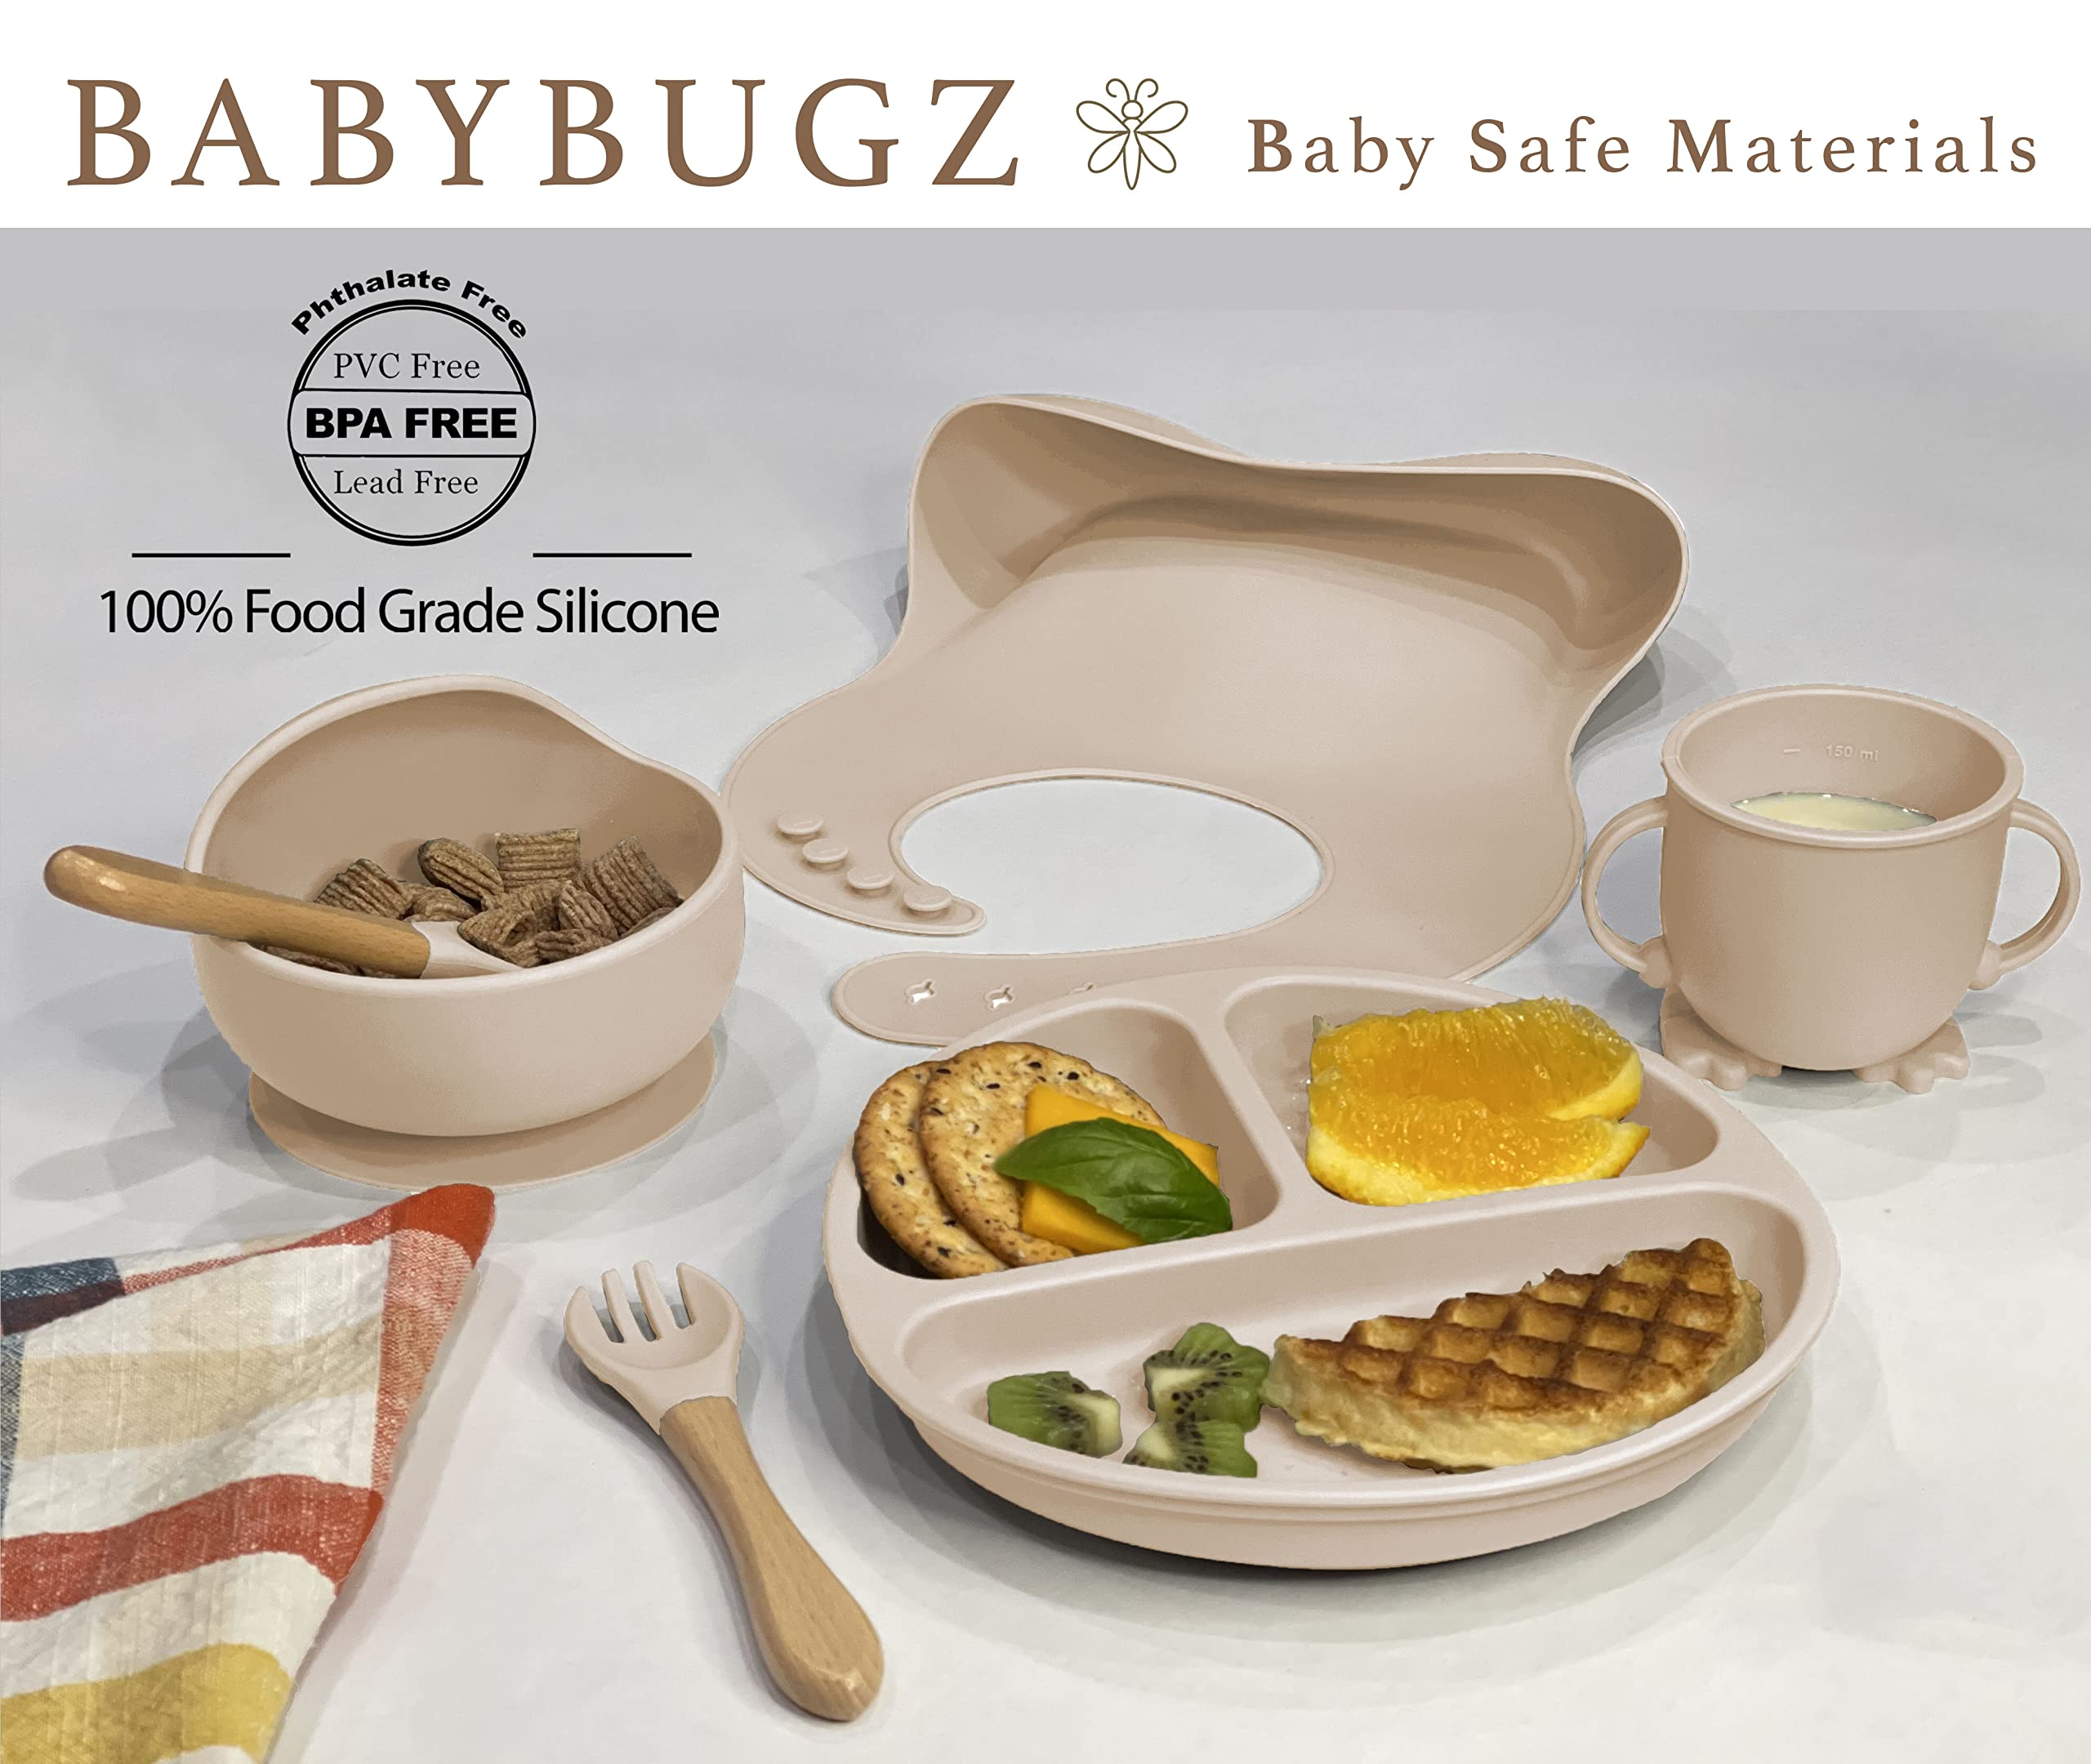 BabyBugz 7 Piece Baby Silicone Feeding Set, Baby Led Weaning Supplies with Silicone Suction Baby Bowls, Baby Silicone Plate With Suction and Baby Bibs, Baby Essentials Led Weaning Utensils (Sand)